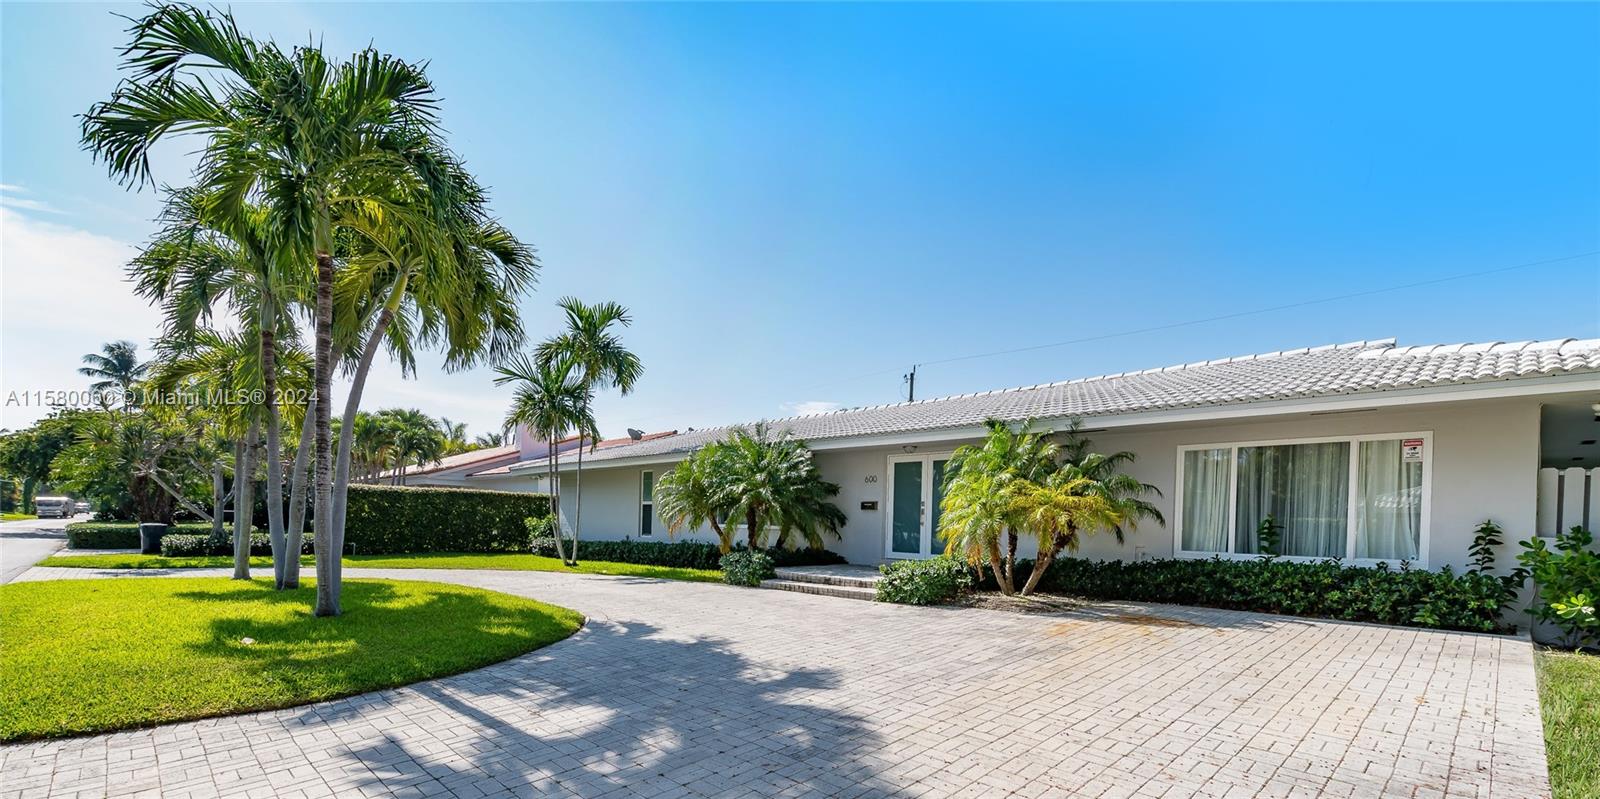 Enjoy exclusive Mashta Island living in this newly remodeled, non-elevated, 2,500 sq.ft. 4 bedroom/3-bathroom. Tenant occupied thru the end of May.  24 hrs. notice.  Appointment needed.